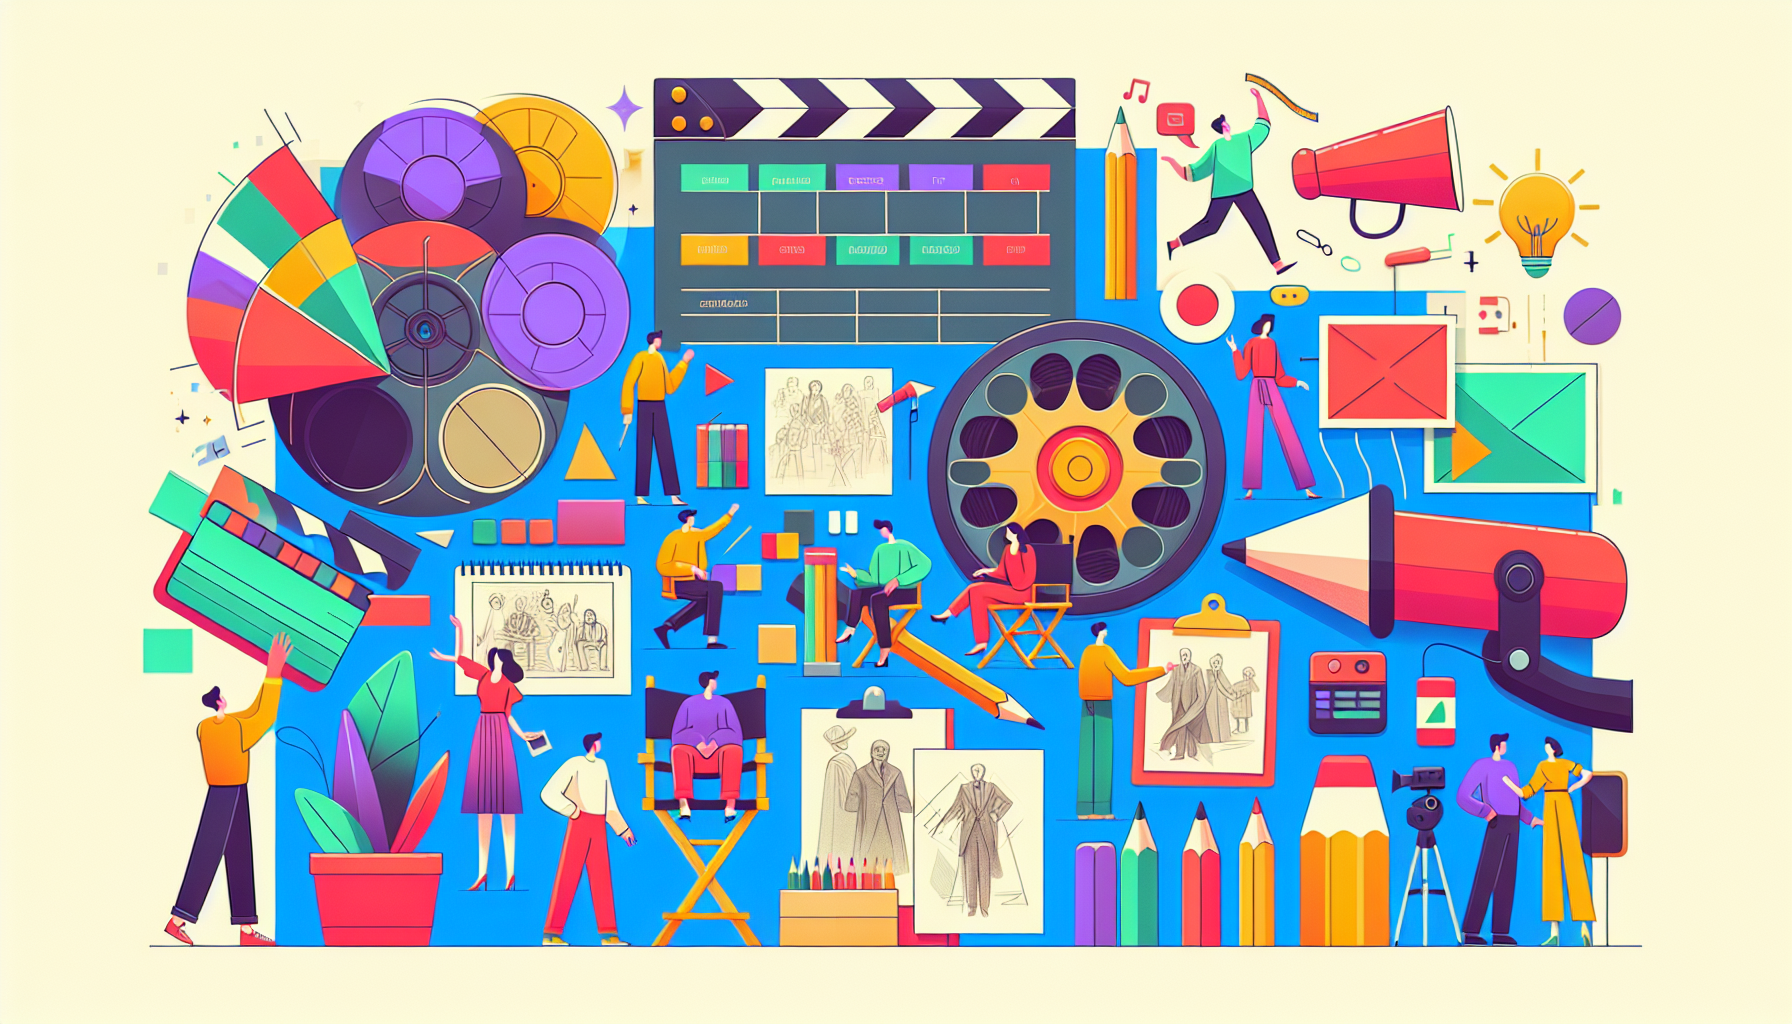 Create an illustration showcasing iconic traits of animation direction. Feature a vibrant color palette and a contemporary aesthetic. Include elements such as characters interacting with film reels, pencil sketches evolving into colorful animations, and a director's chair and megaphone as central motifs. Make sure to keep the image wordless to emphasize visual storytelling.